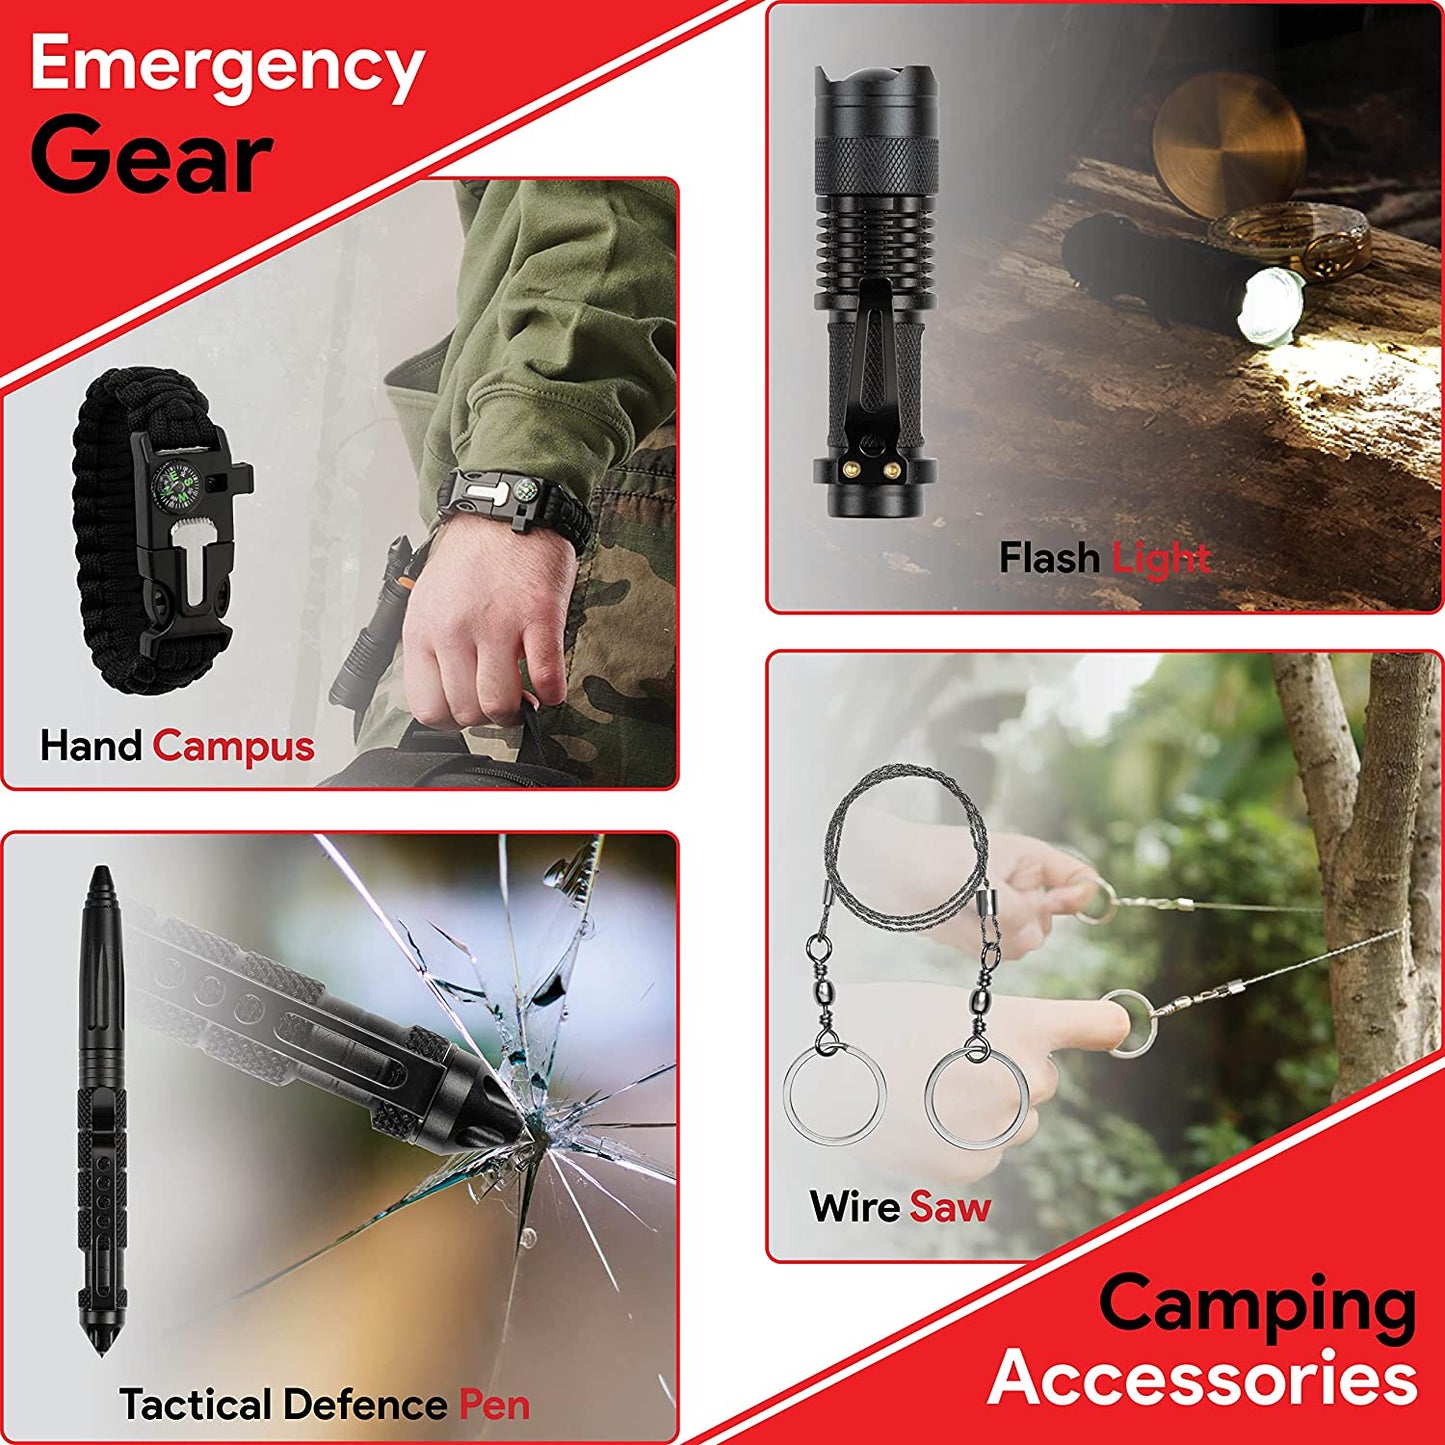 20 in 1 Emergency Survival Kit , Professional Gear for Outdoor Camping, Equipment & First Aid Accessories, Gift Idea Dad, Husband, Boyfriend, Great Hiking, Hunting, Black